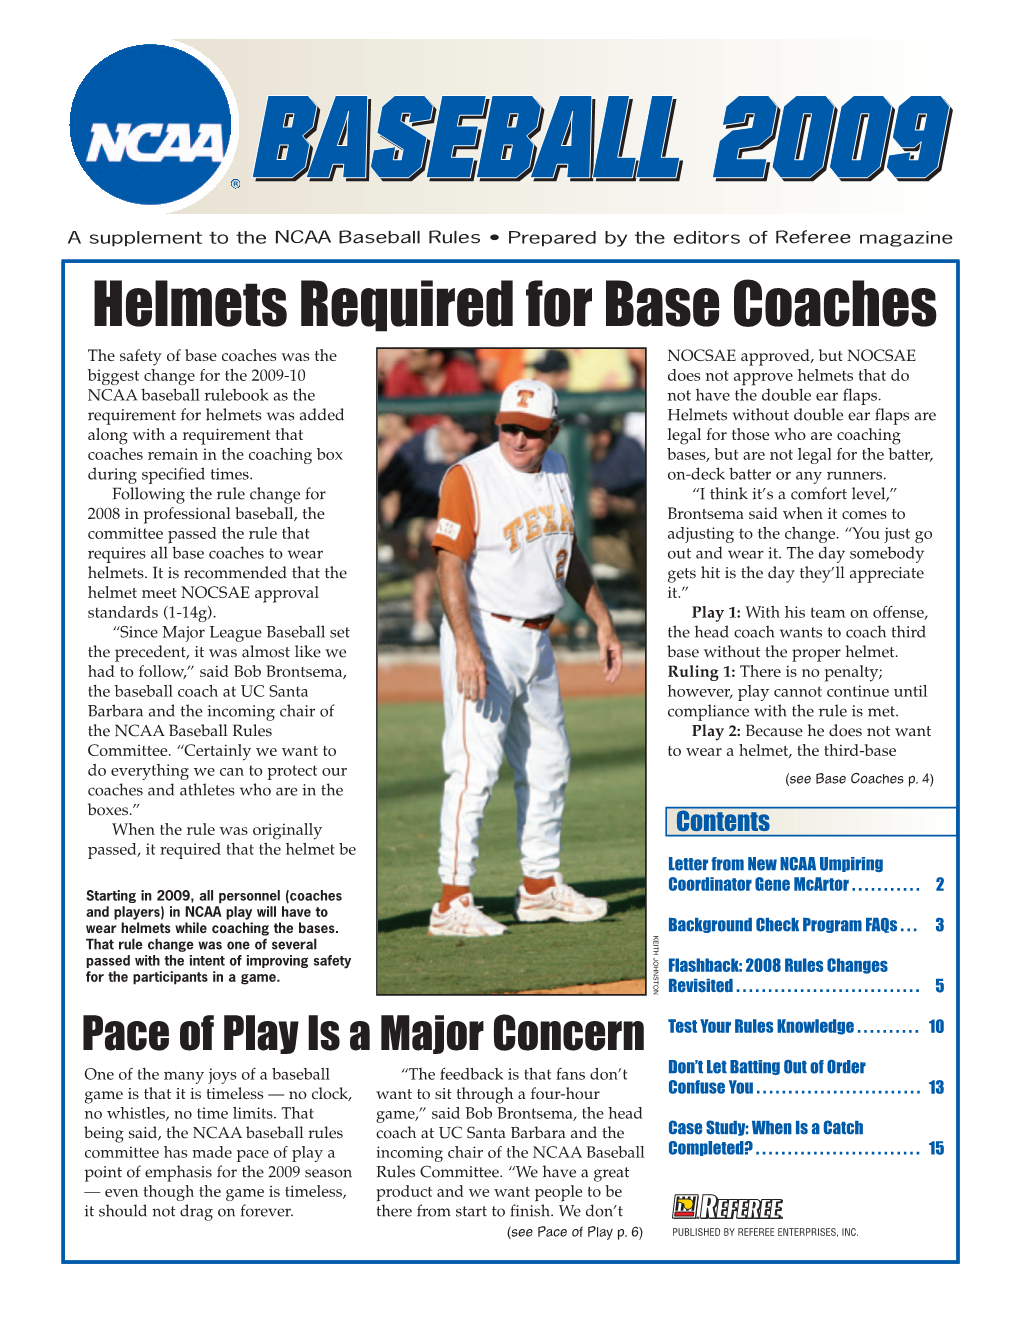 Helmets Required for Base Coaches